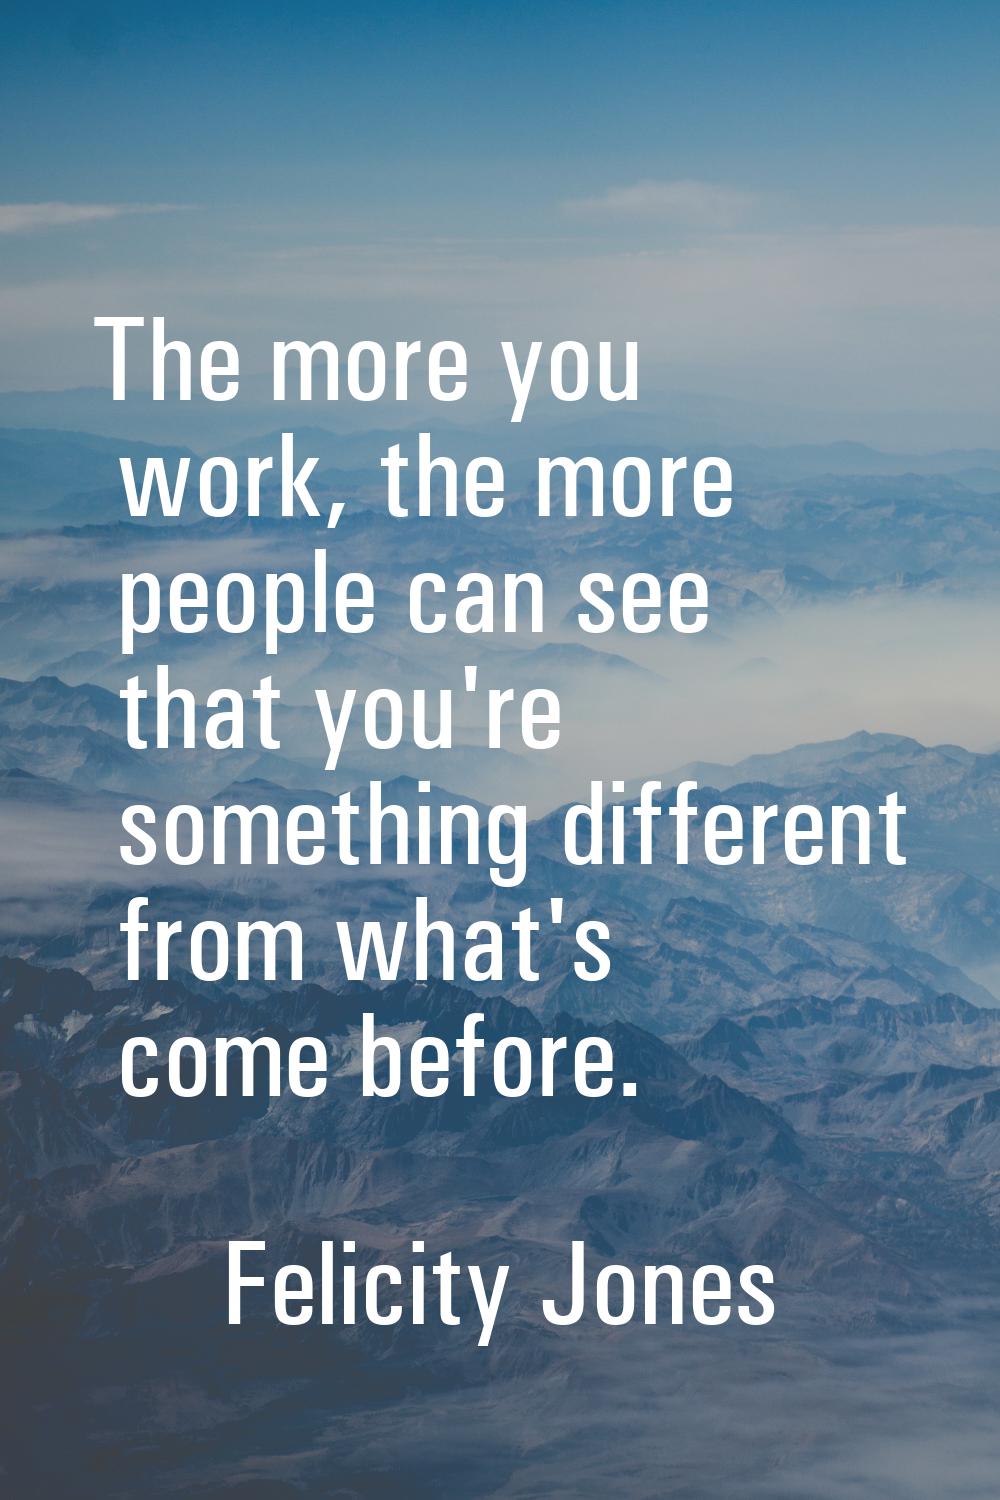 The more you work, the more people can see that you're something different from what's come before.